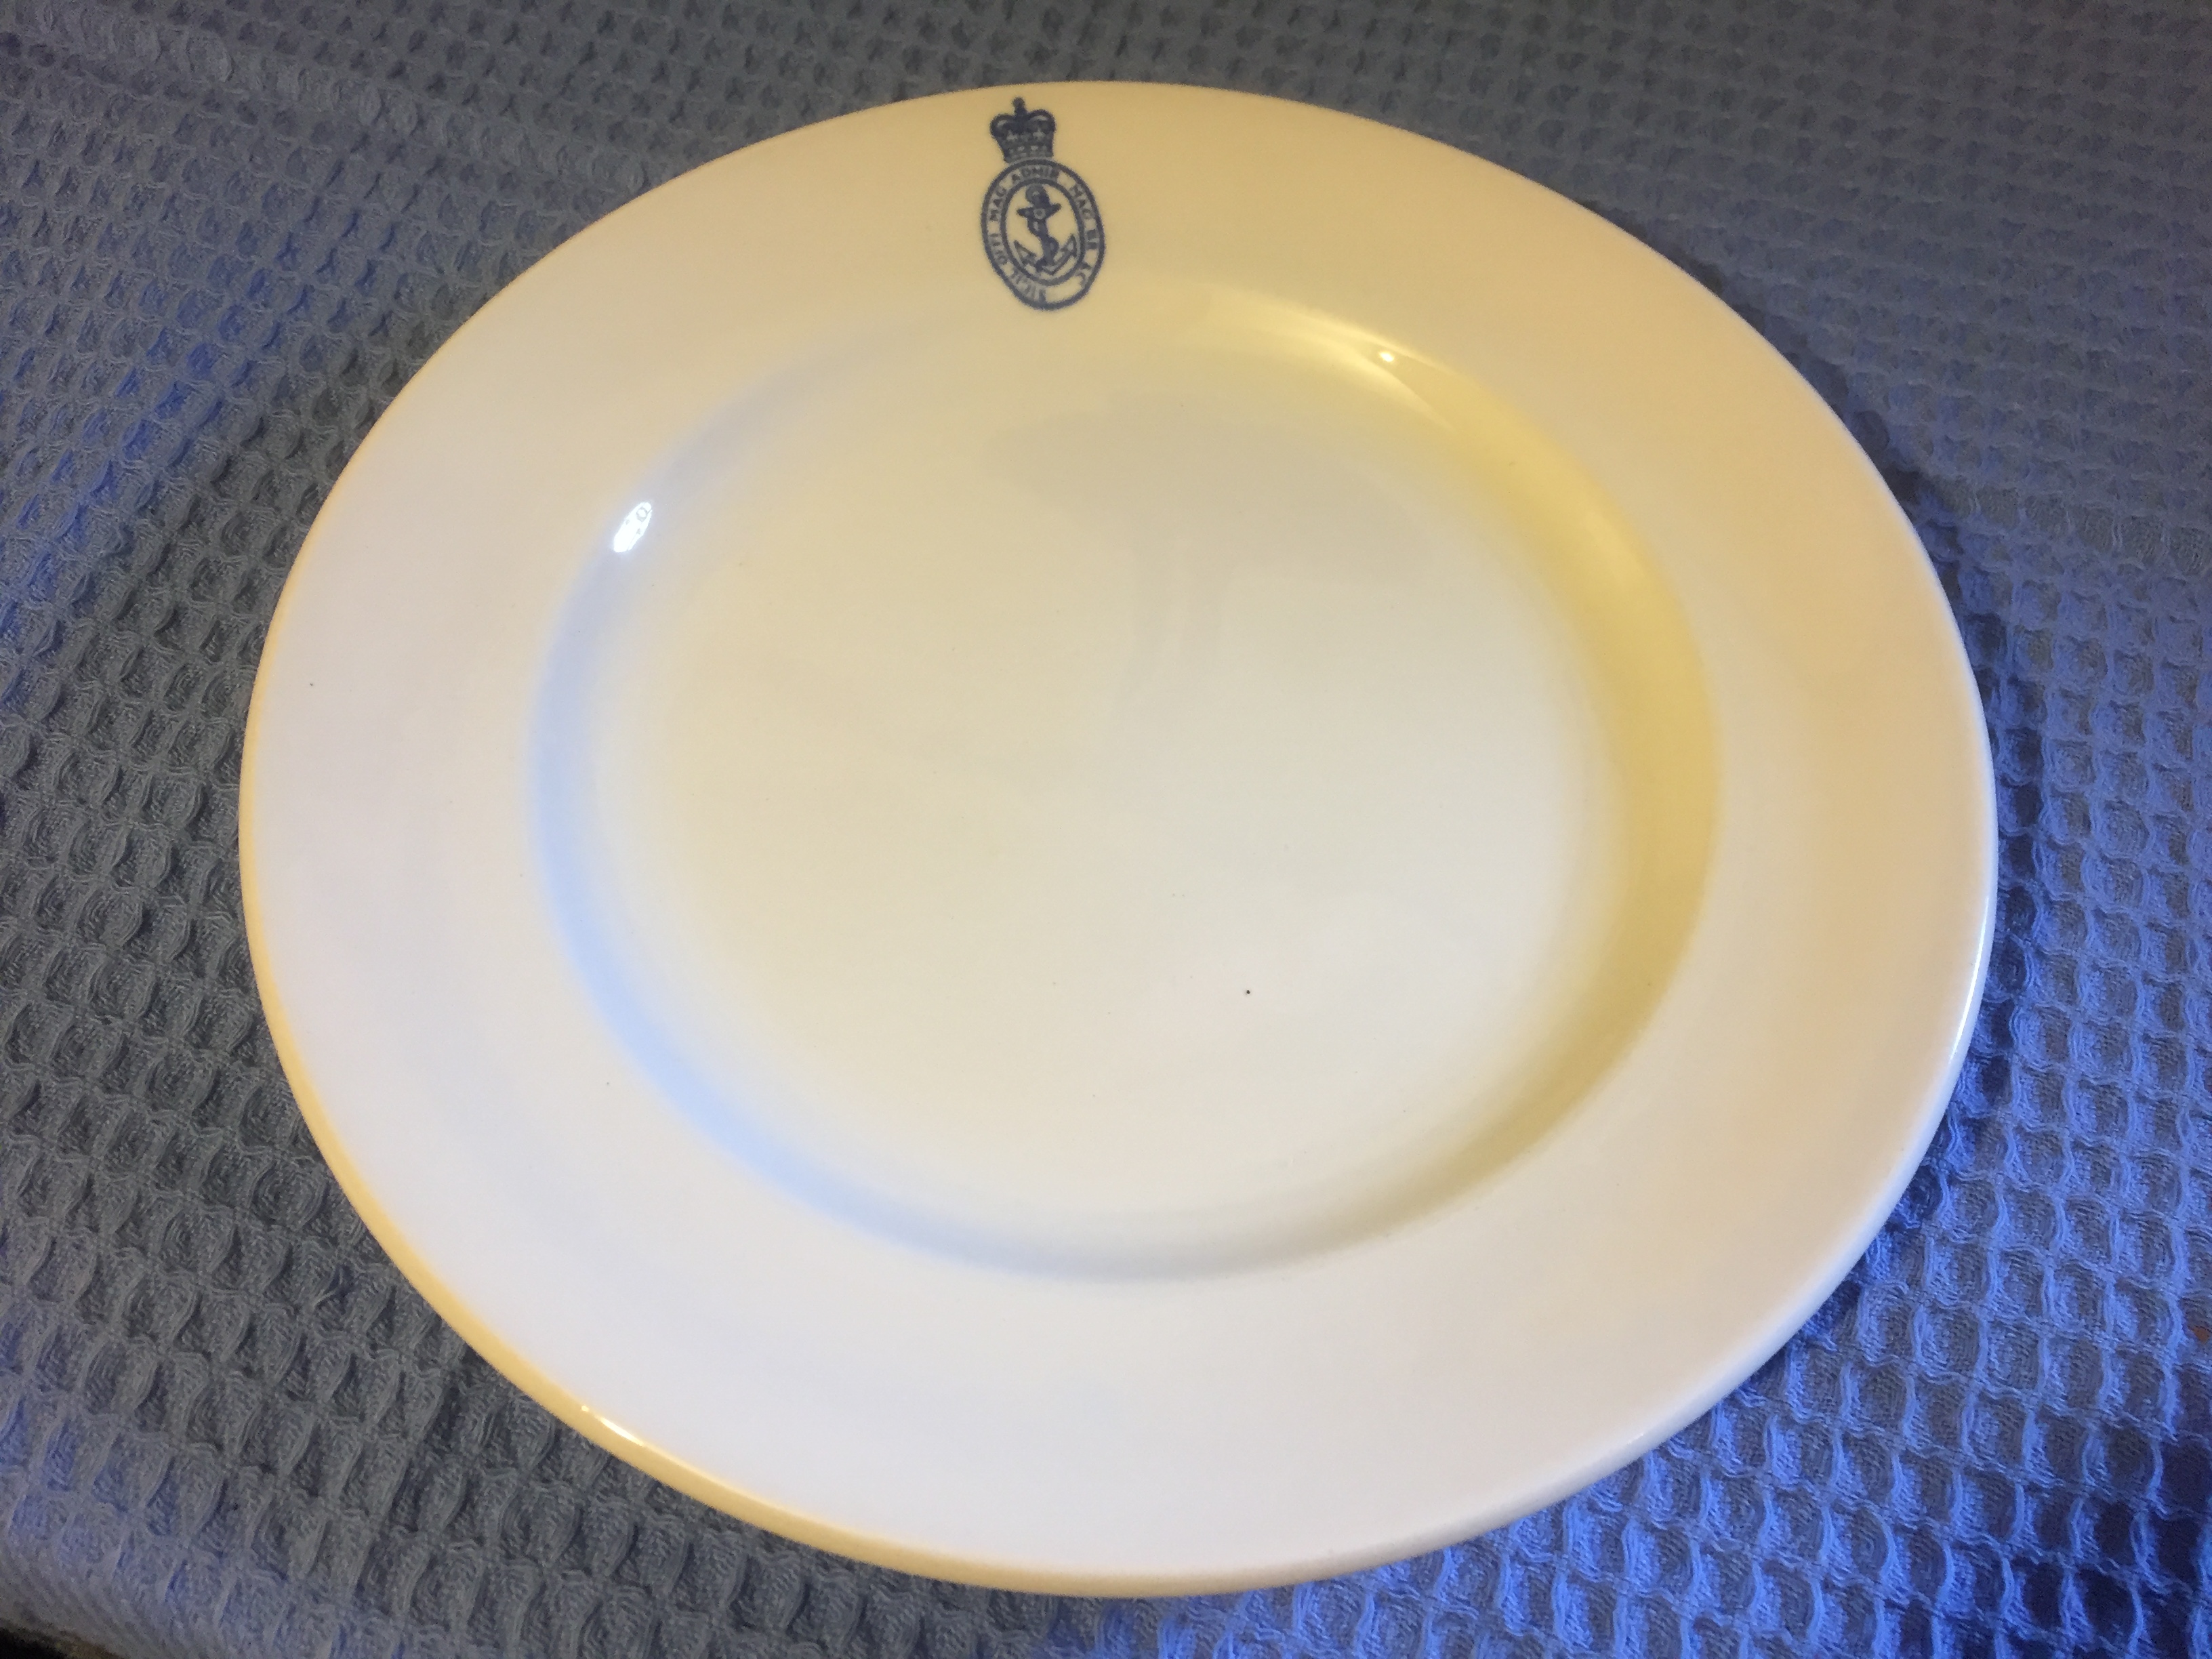 ORIGINAL ROYAL NAVY AS USED IN SERVICE EARLY TYPE DINING PLATE